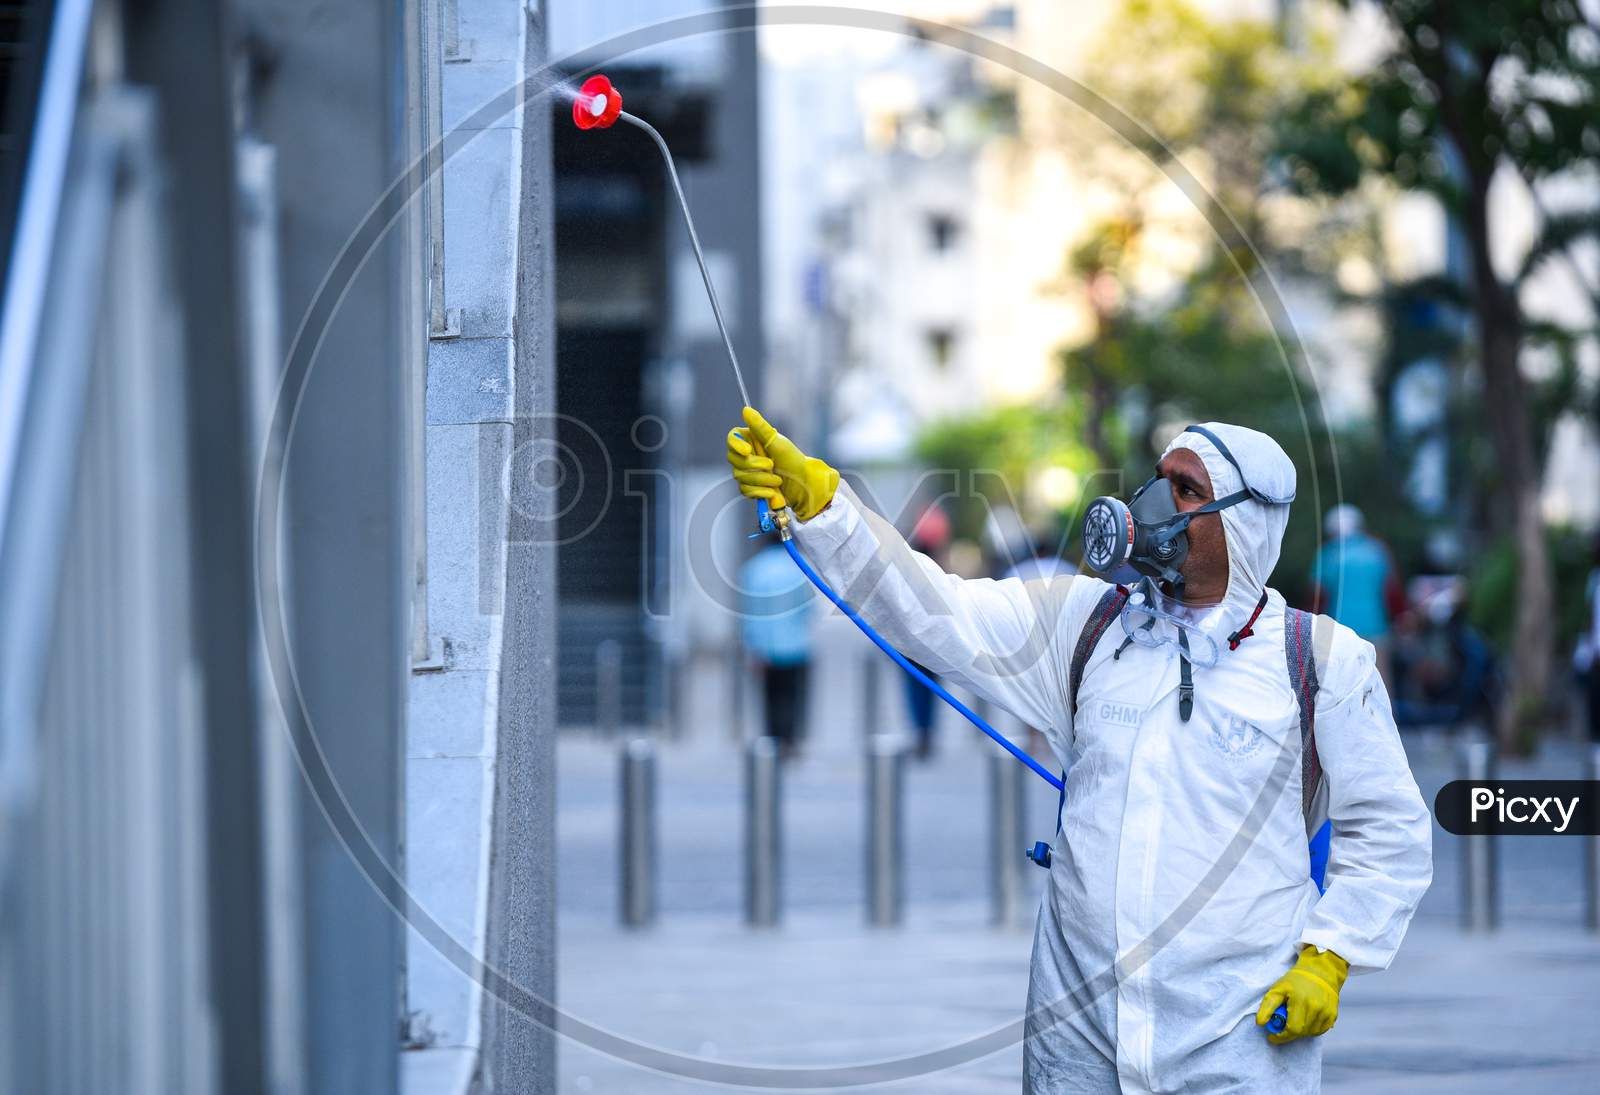 Disaster Response Force(DRF) team spraying Disinfectant Solution across the Hyderabad City to reduce the spread of the COVID-19 Virus or Coronavirus with full body masks on